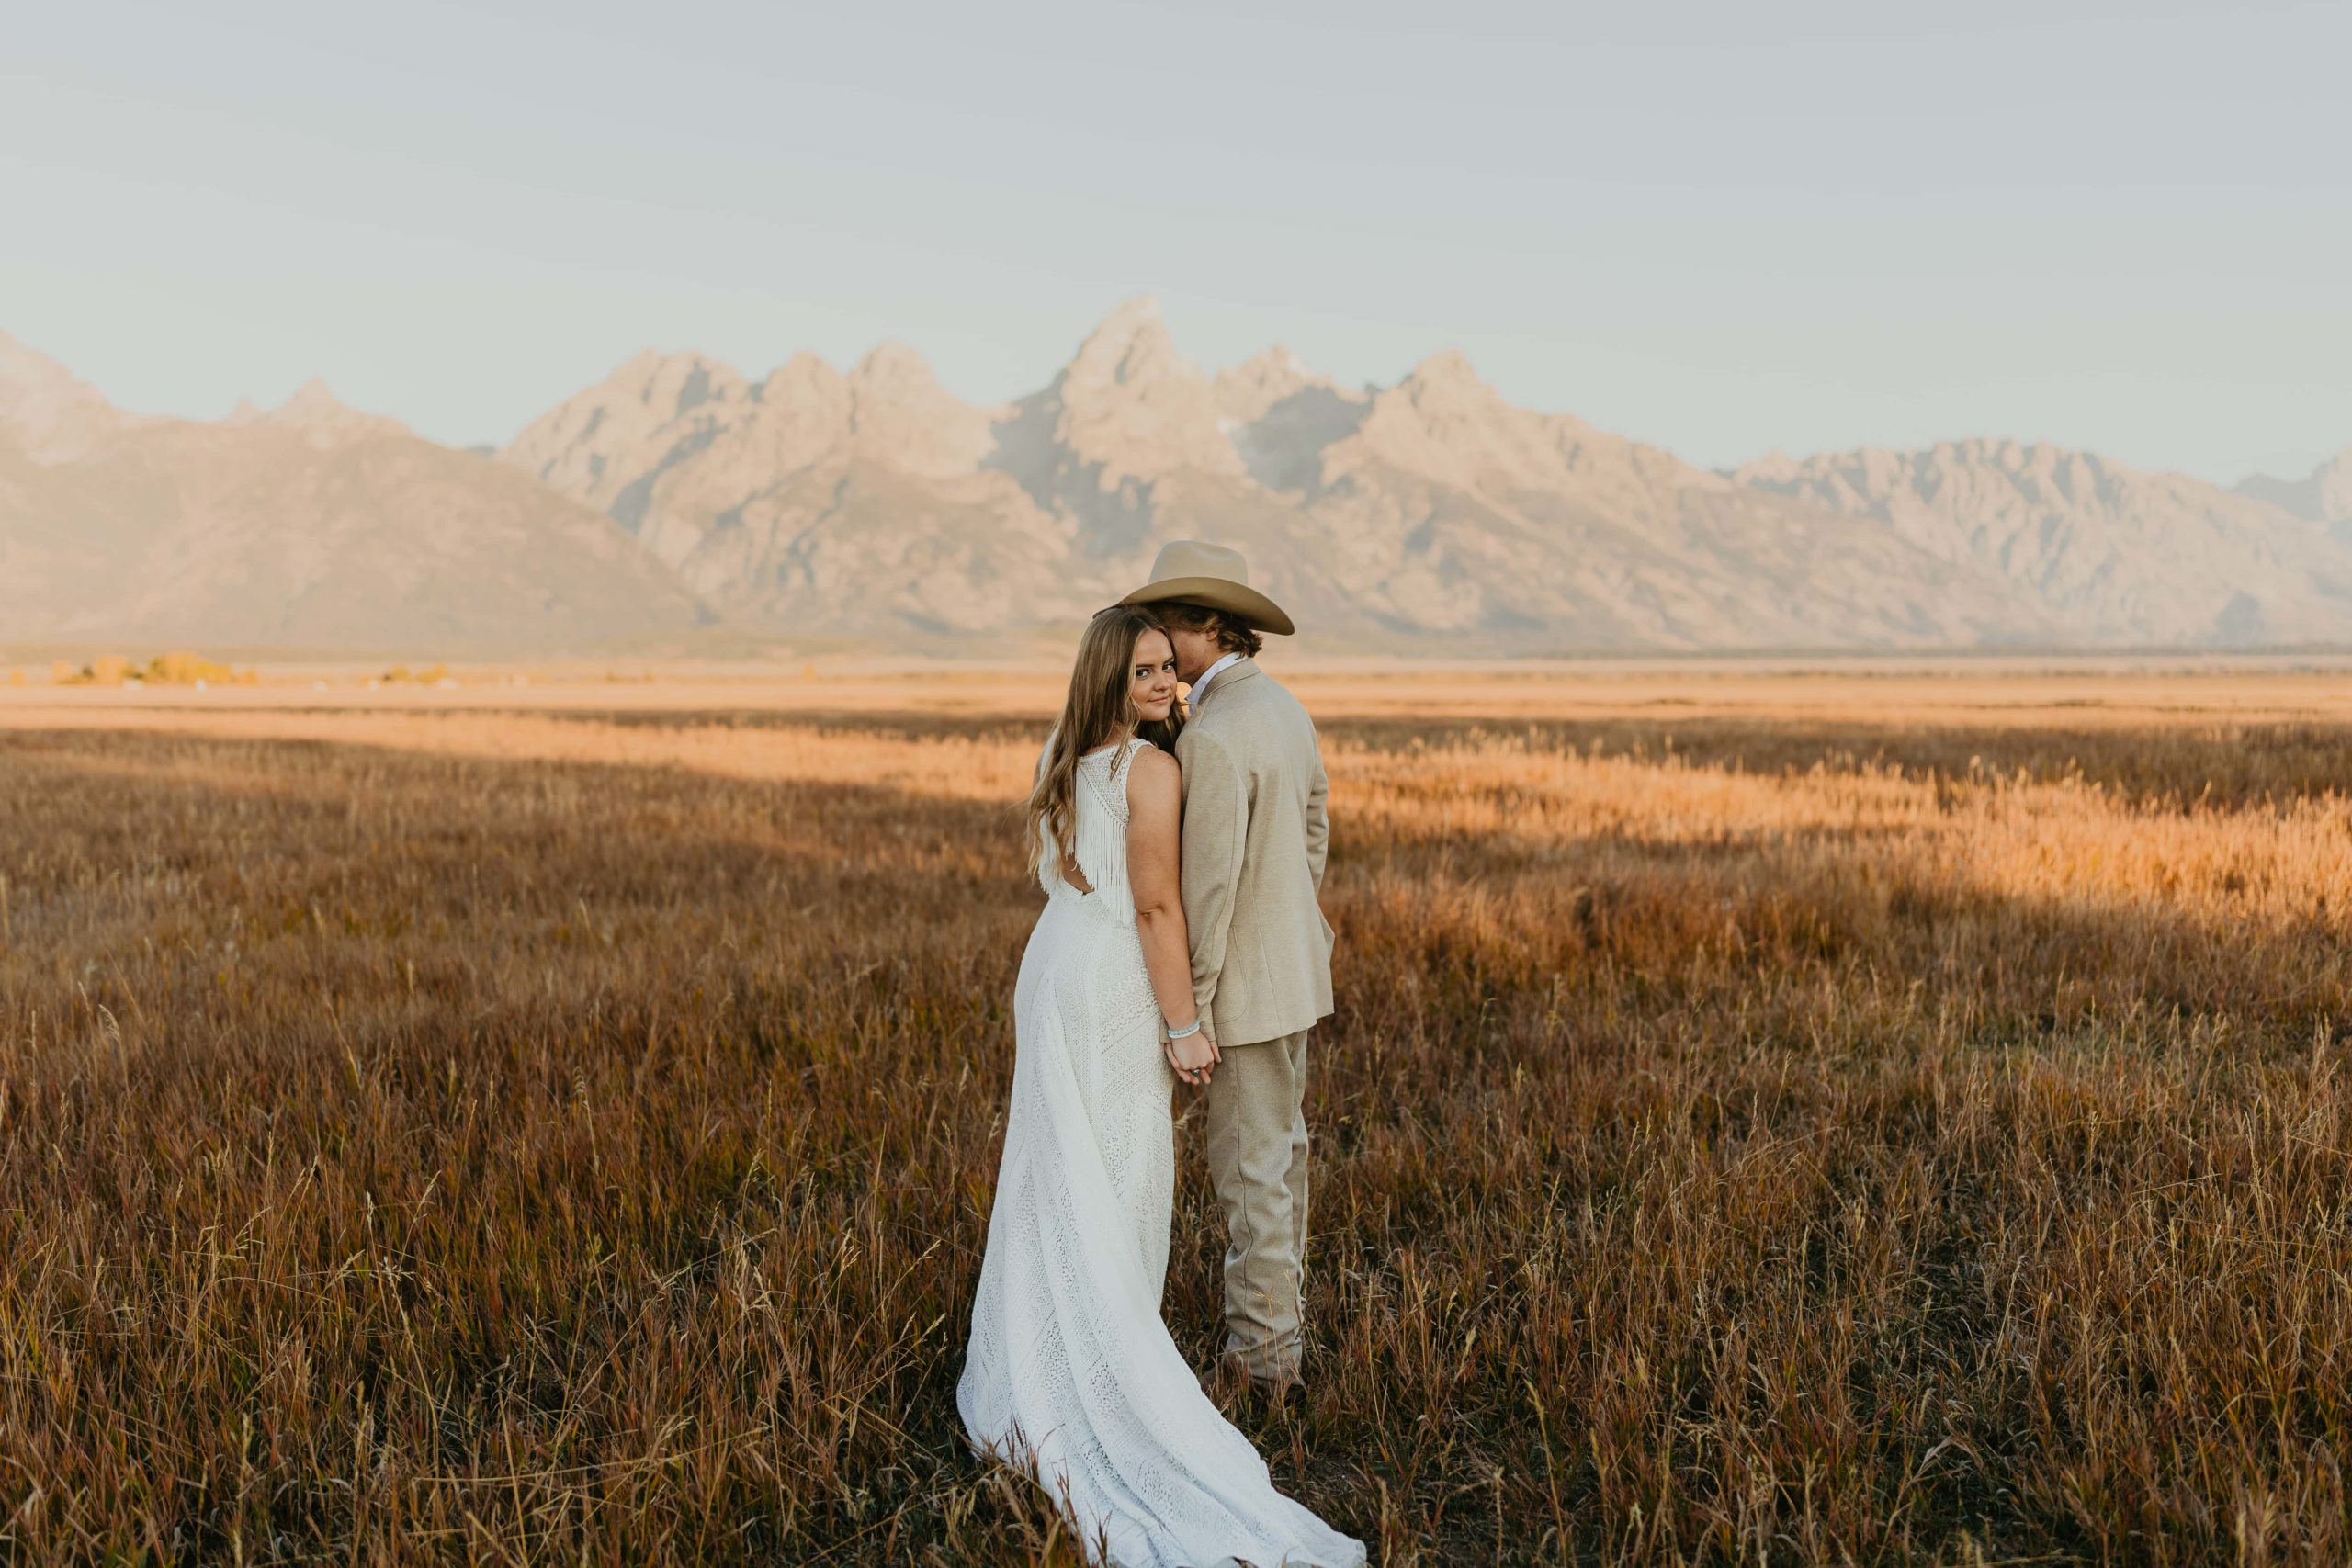 A couple eloping at mormon row in jackson hole wyoming for their wedding